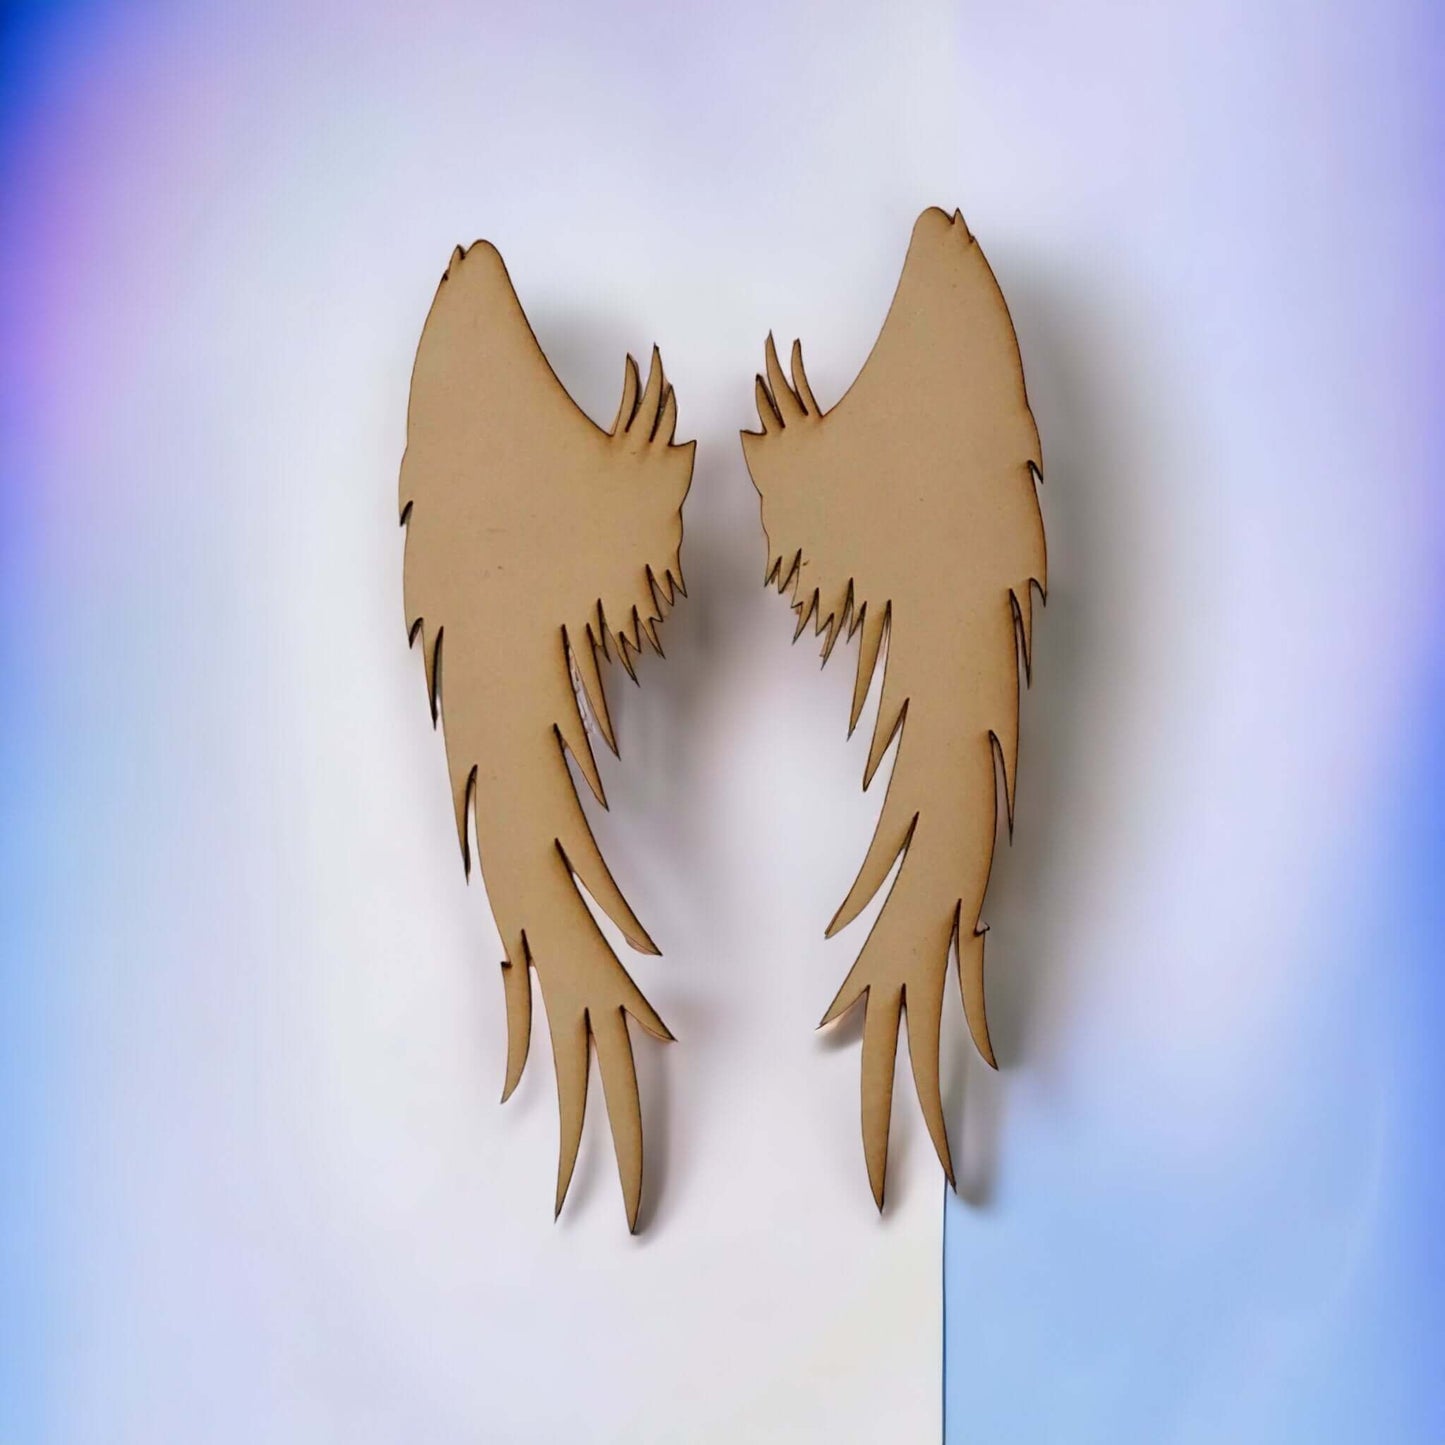 Angel Wings MDF Shape DIY Raw Cut Out Art Craft Décor - The Renmy Store Homewares & Gifts 